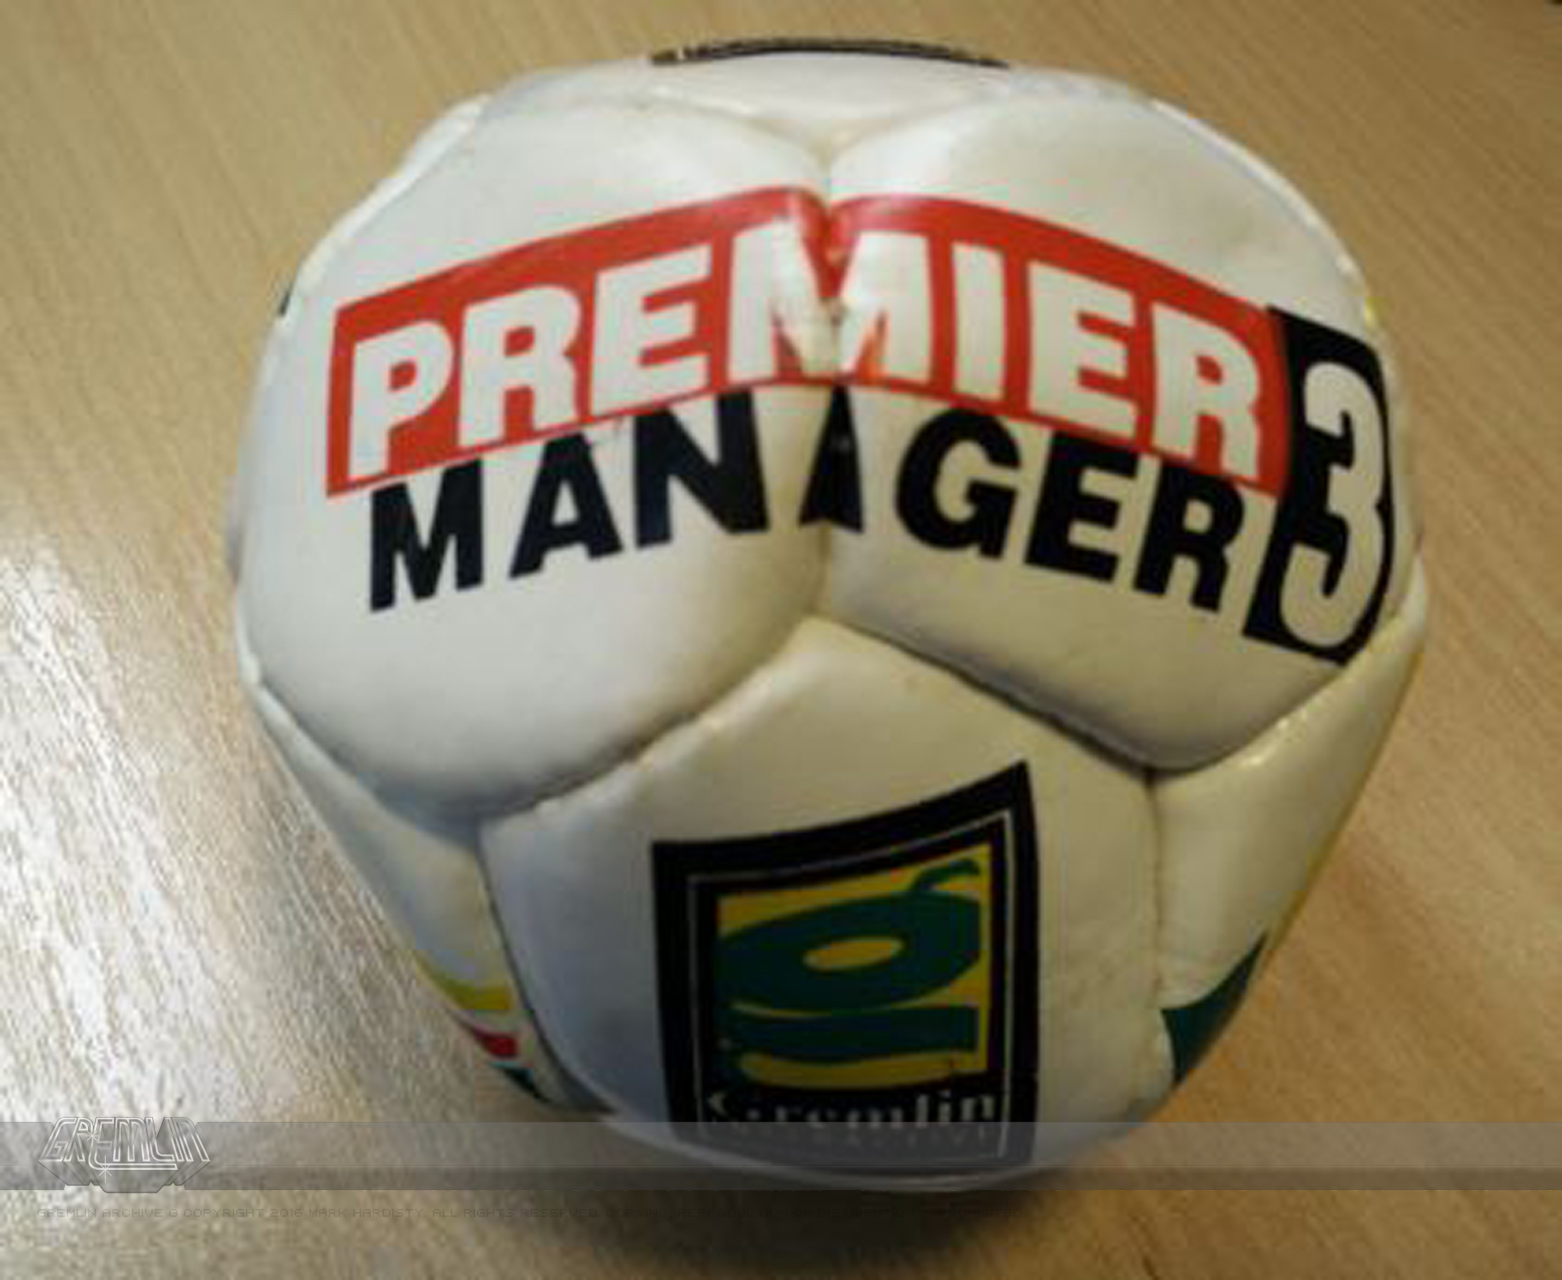 Premier Manager 3 Football